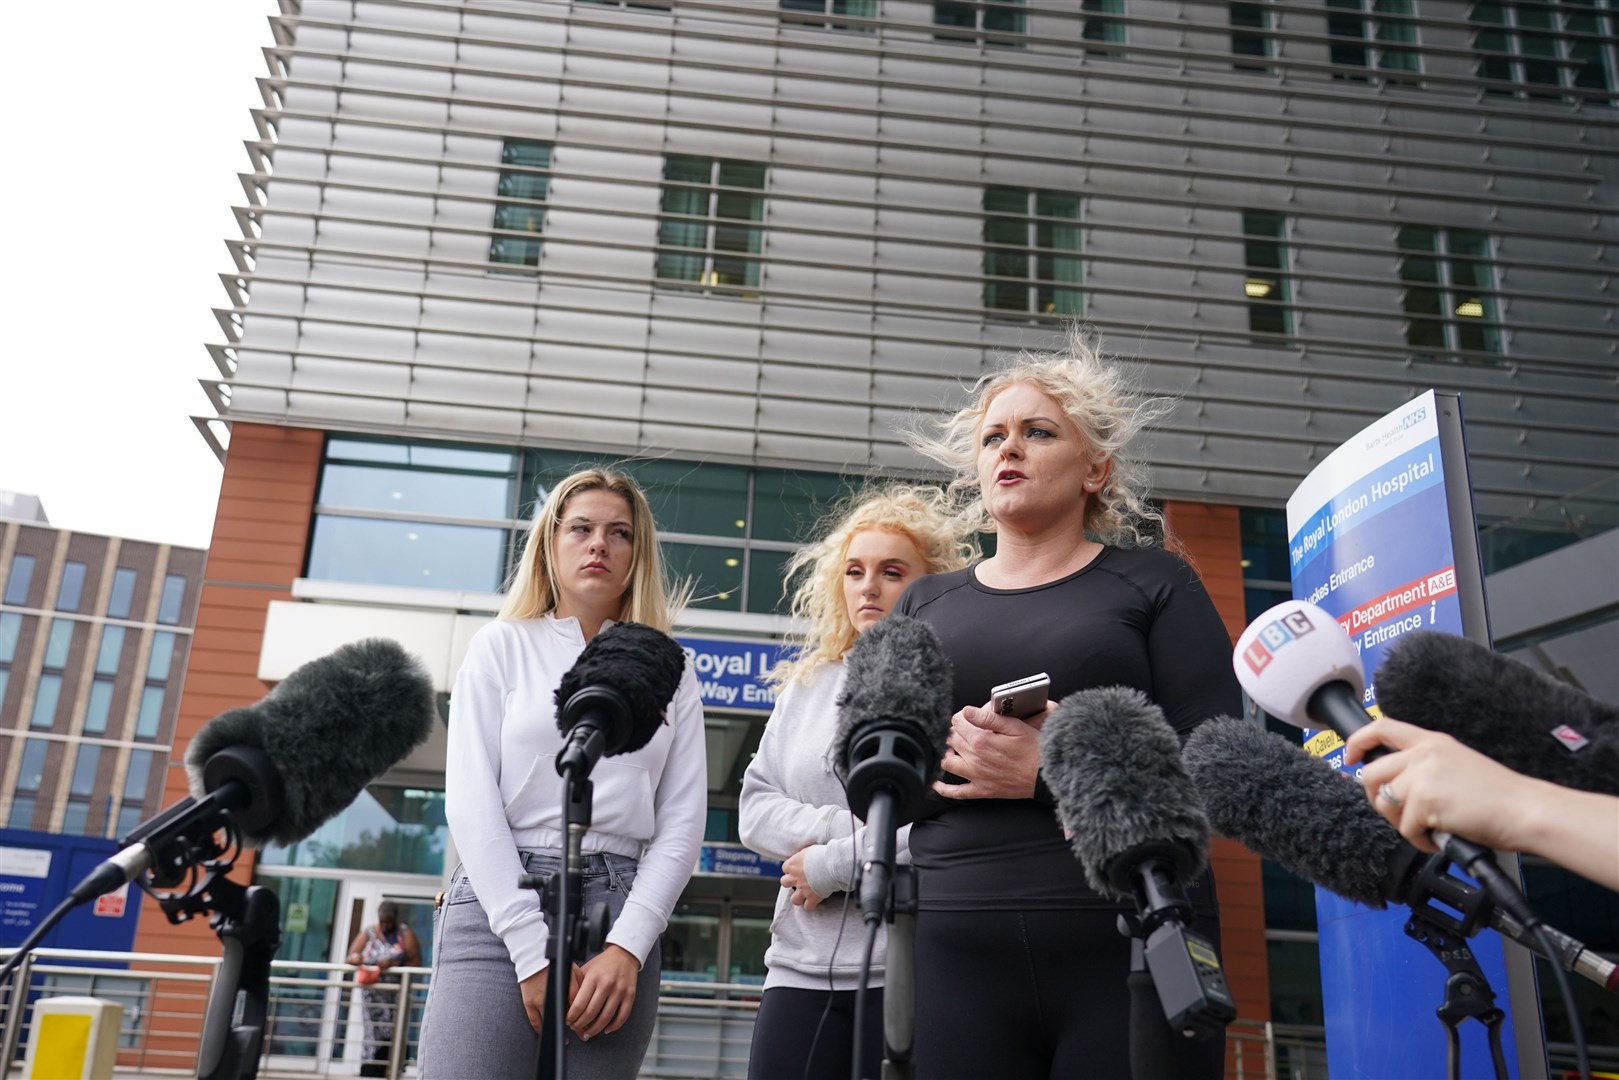 The mother of Archie Battersbee, Hollie Dance (right), speaks to the media outside the Royal London hospital in Whitechapel (Dominic Lipinski/PA)